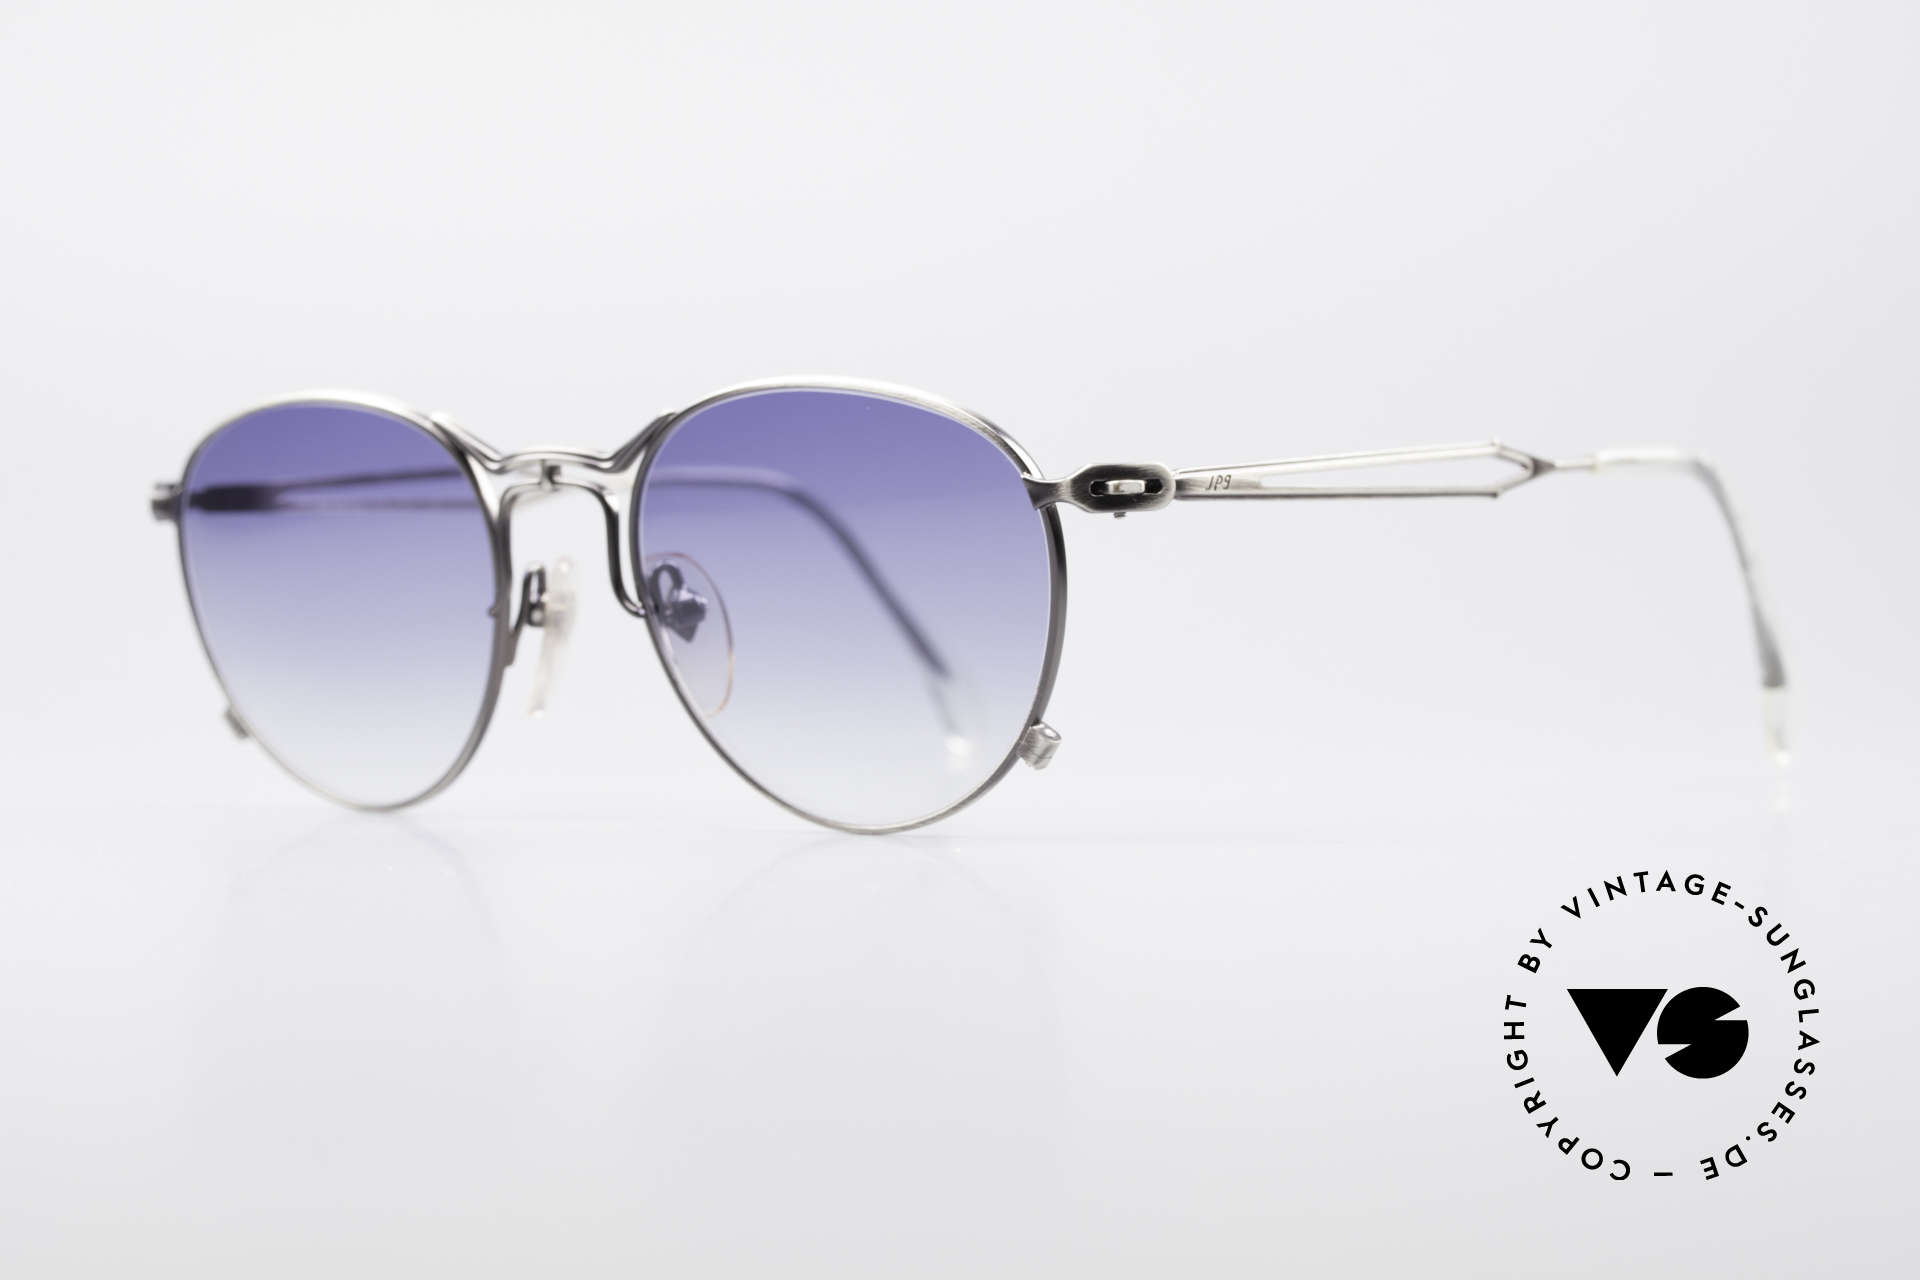 Jean Paul Gaultier 55-2177 Rare Designer Sunglasses, also called: "charcoal gray / silver" or "antique silver", Made for Men and Women